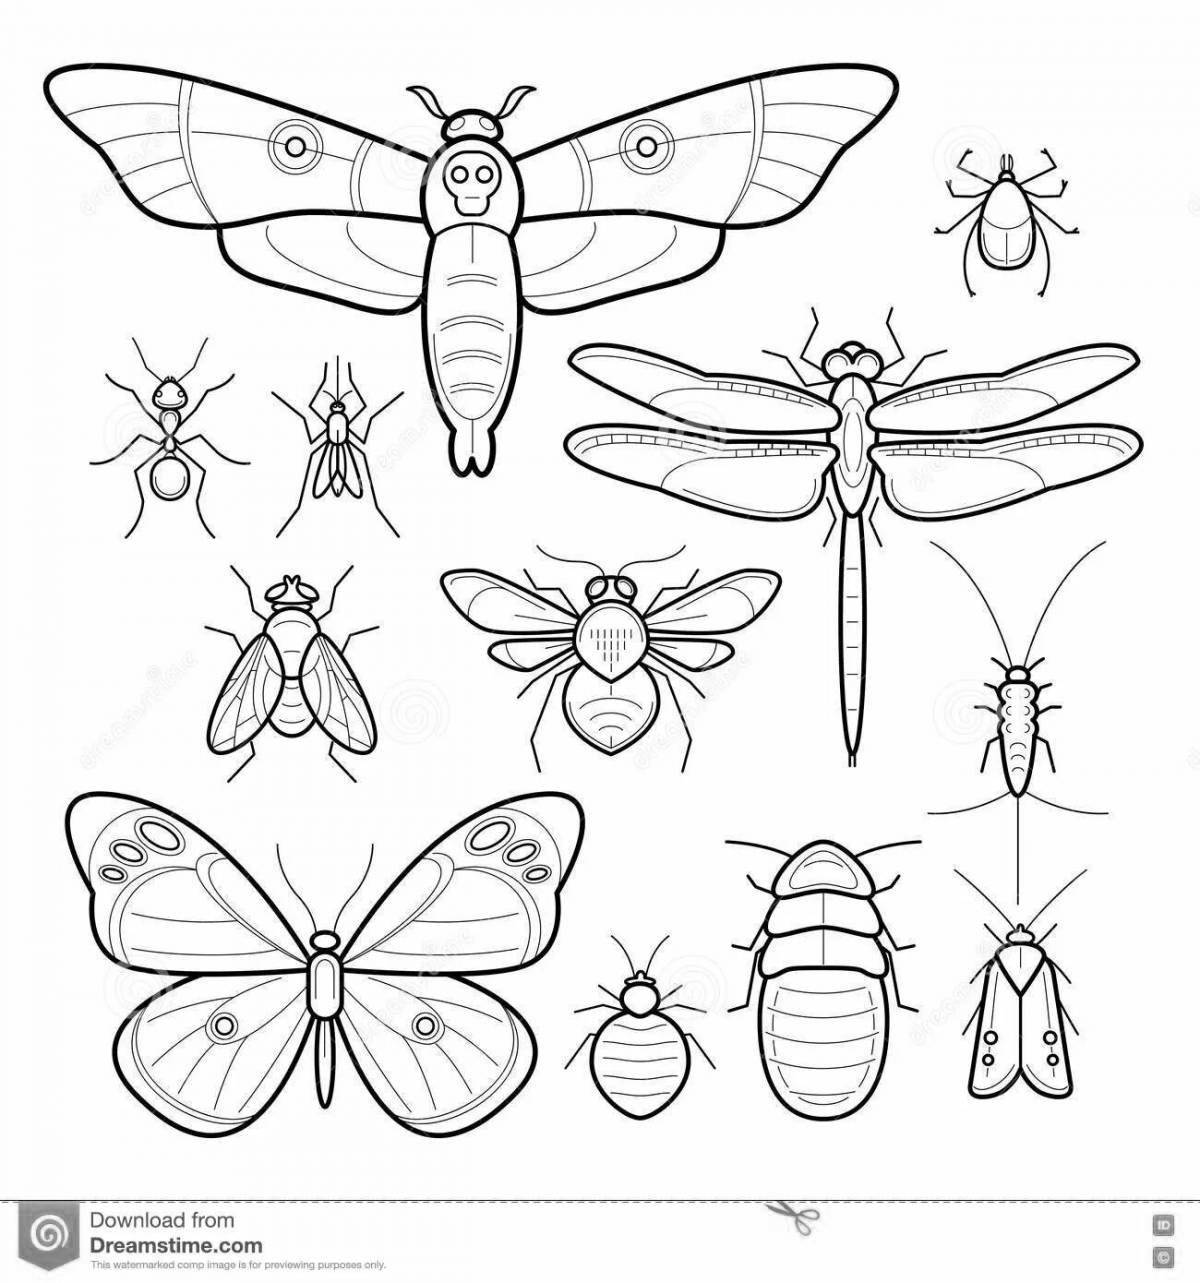 Fun coloring of the insect class